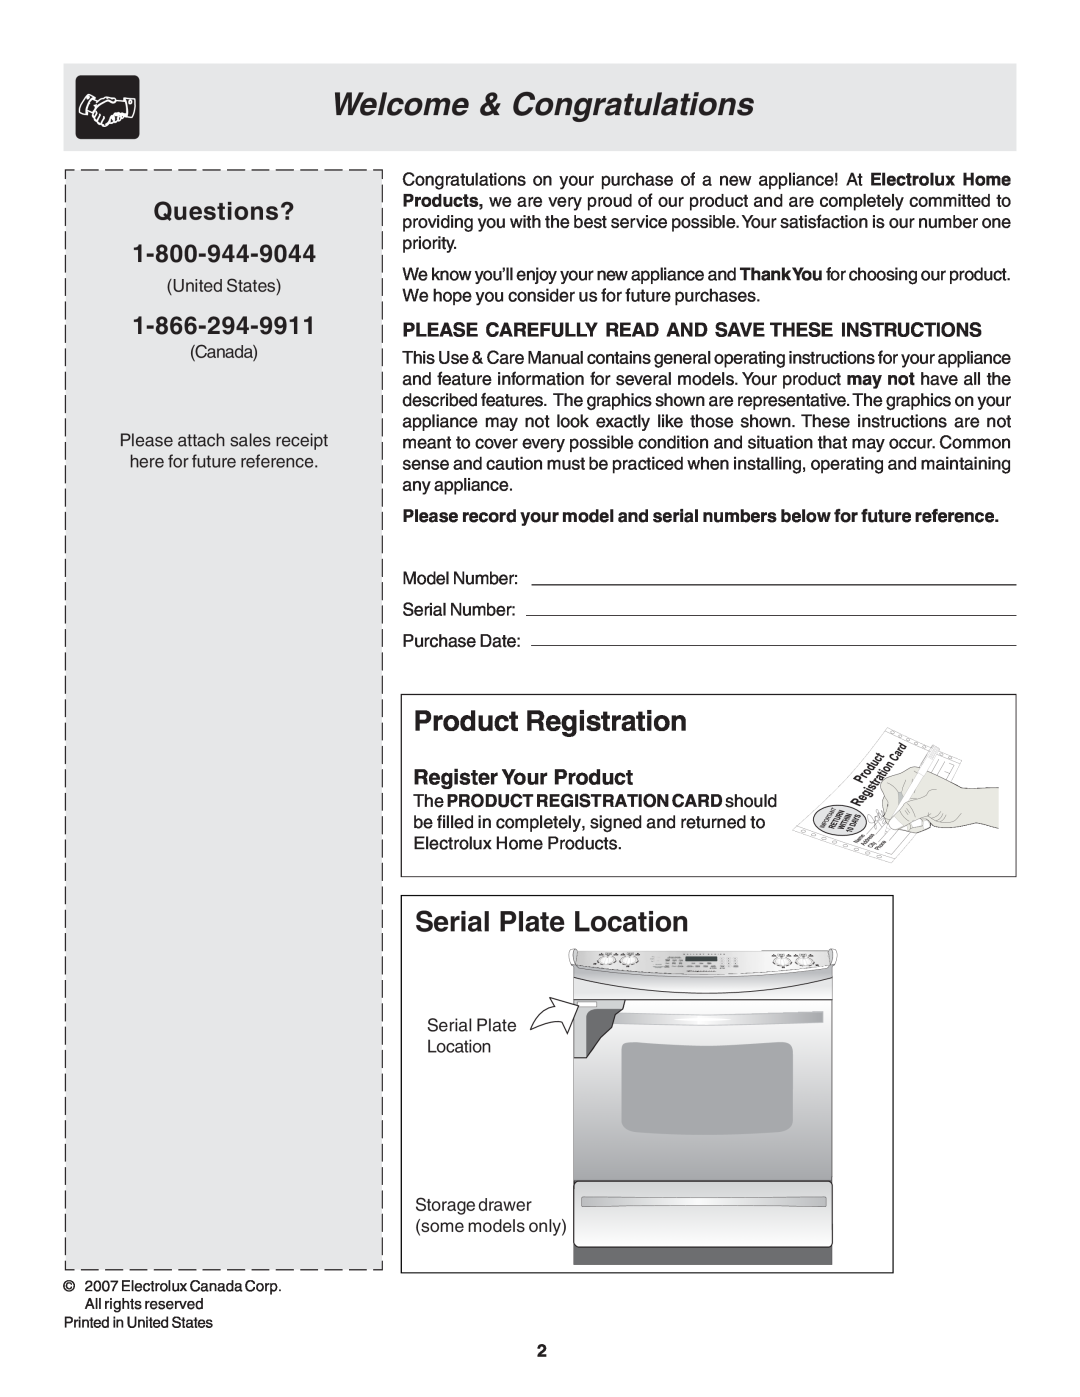 Frigidaire 318203825 warranty Welcome & Congratulations, Product Registration, Serial Plate Location, Register Your Product 